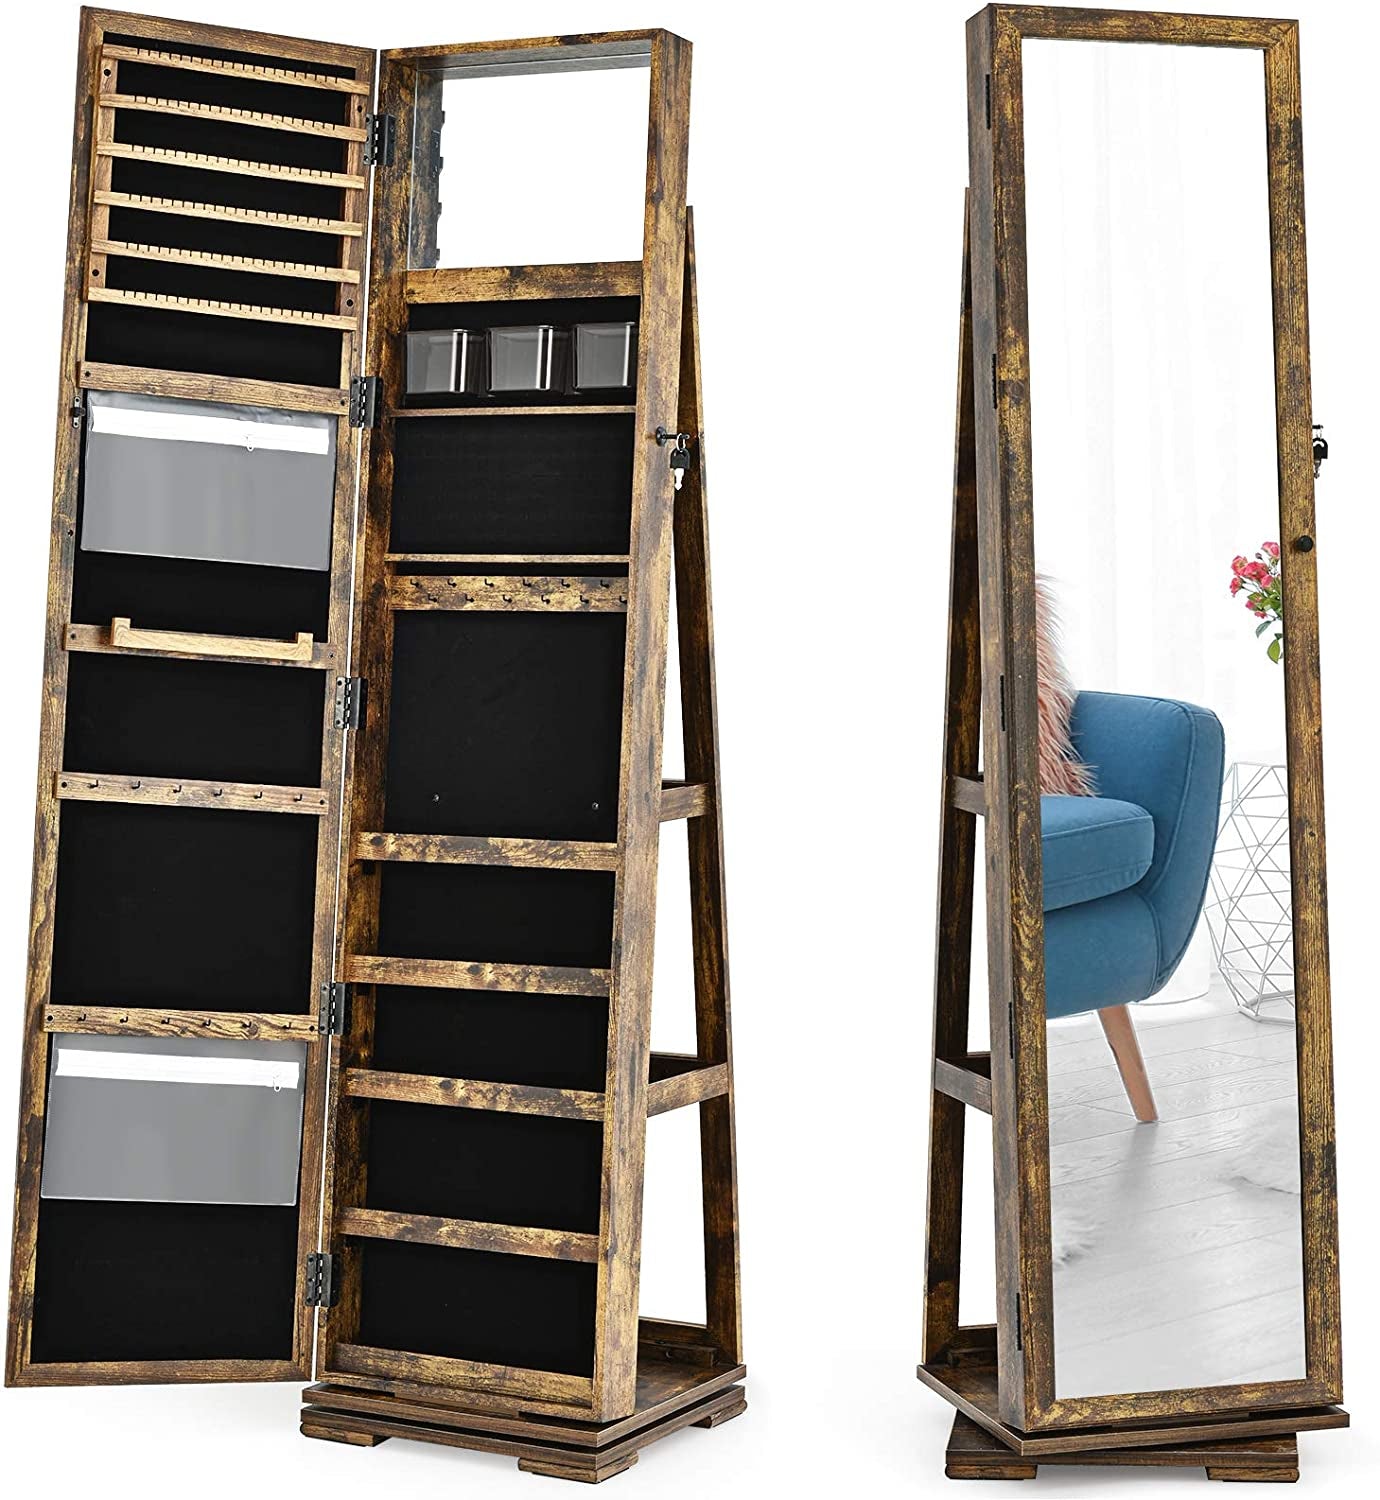 Professional Title: " 360° Swivel Jewelry Armoire with Full Length Mirror, Lockable Standing Jewelry Cabinet Organizer, Spacious Storage Capacity, Built-in Makeup Mirror, and Rear Storage Shelves (Rustic Brown)"